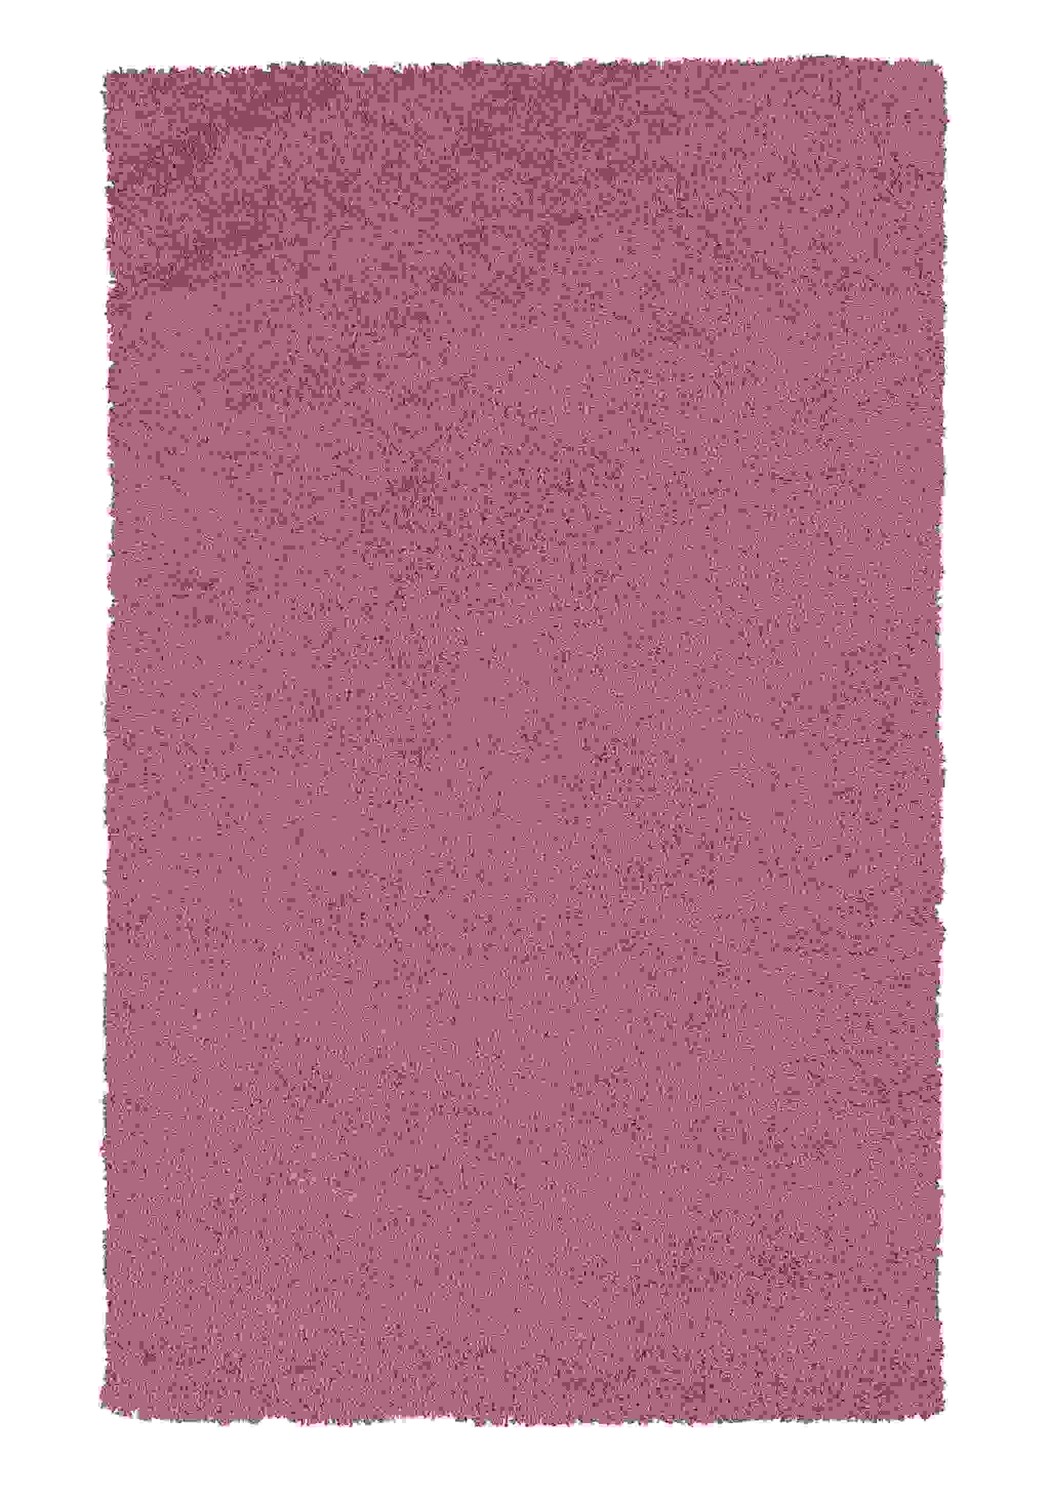 3' x 5' Polyester Hot Pink Area Rug